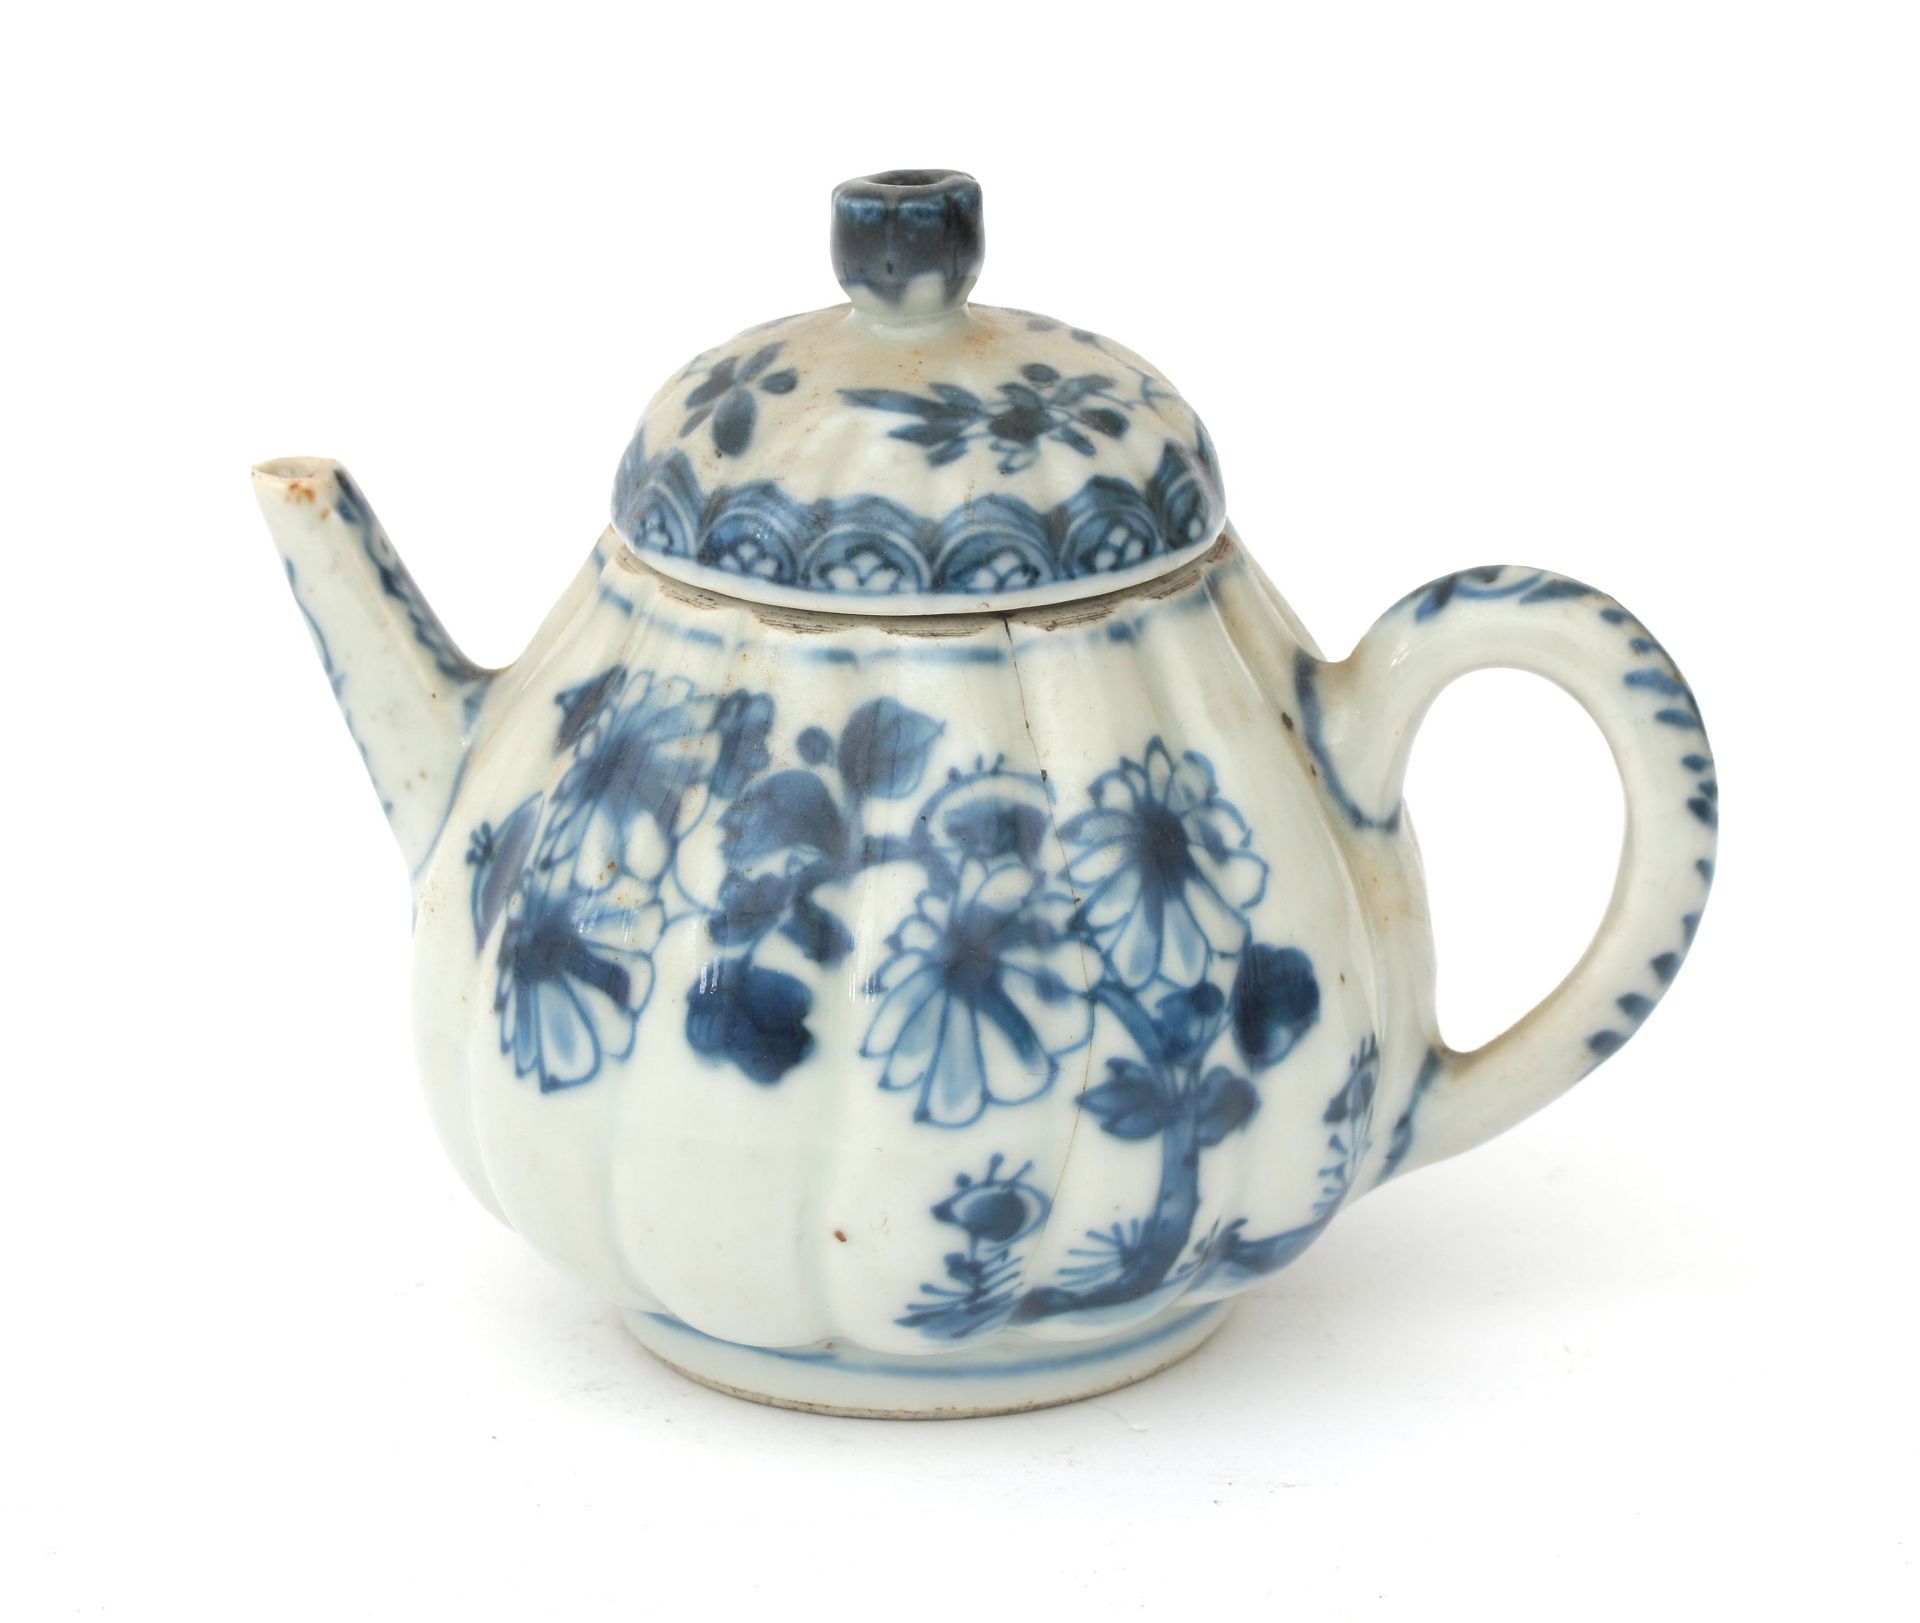 A Chinese porcelain teapot with blue-and-white flower decoration, Qianlong, second half 18th